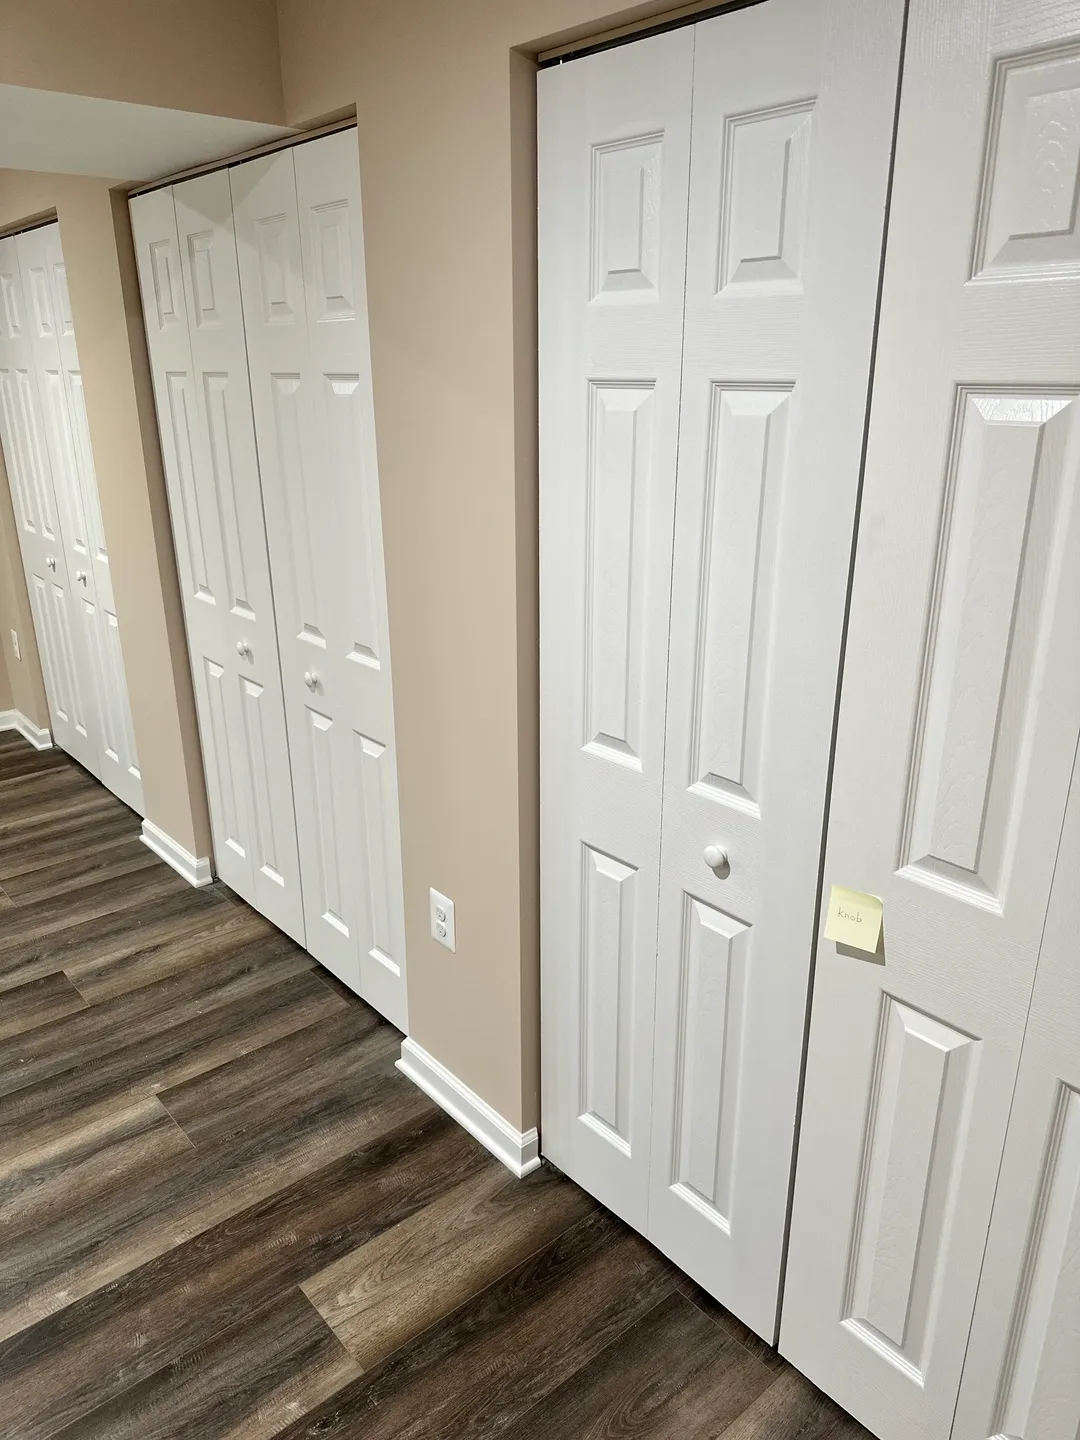 A row of white doors in a room.